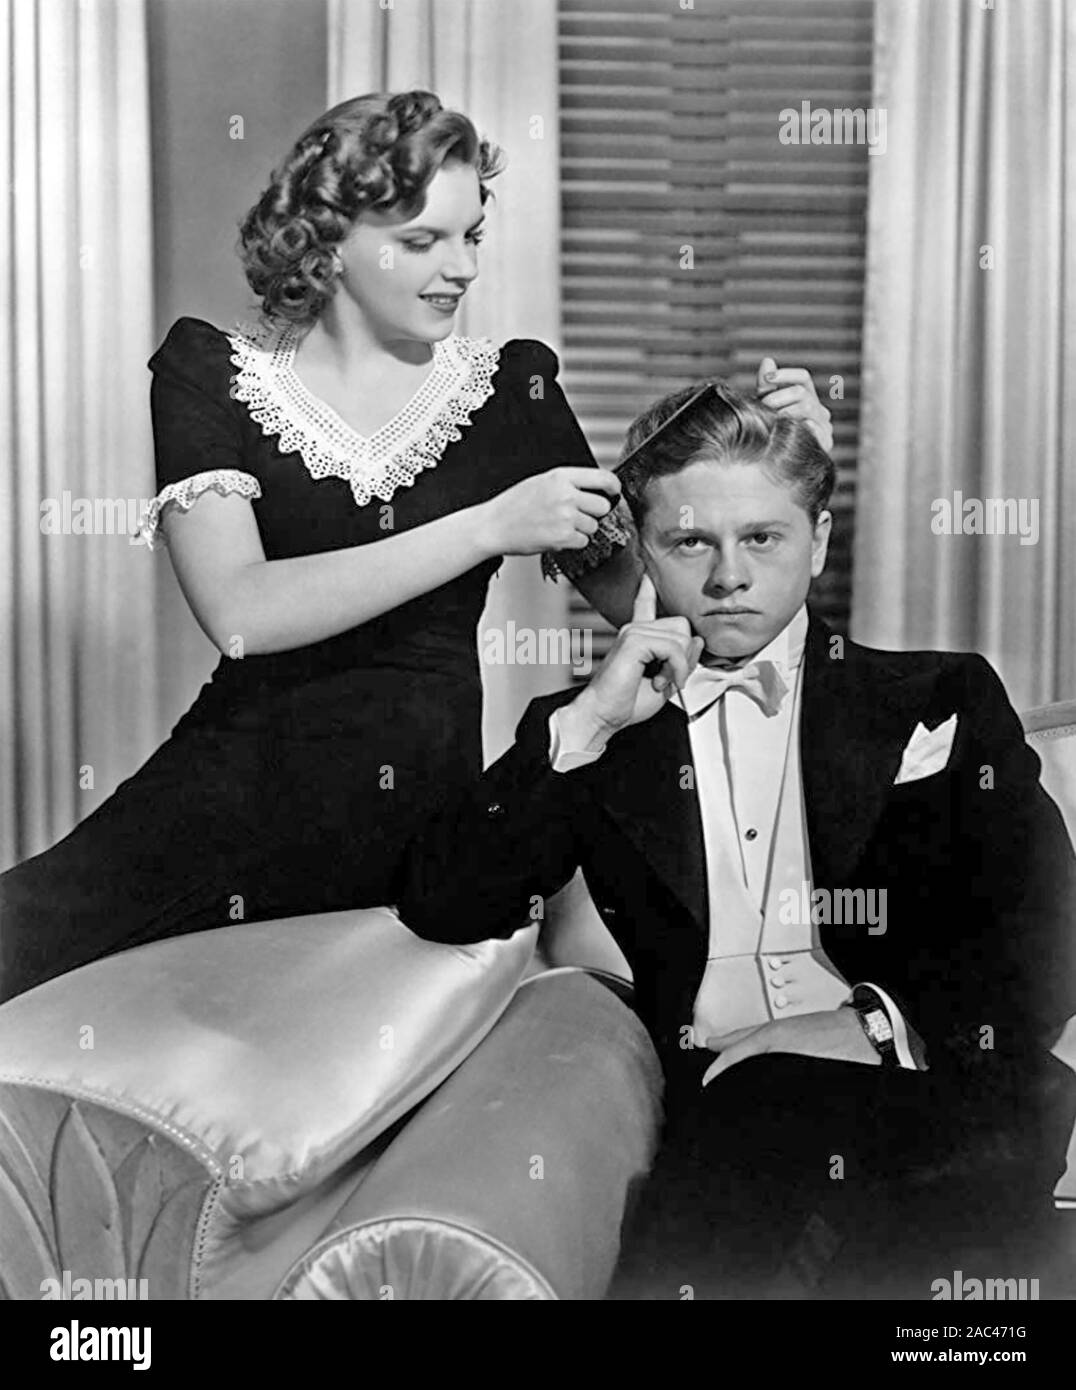 ANDY HARDY RÉPOND AUX DEBUTANTE 1940 MGM film avec Judy Garland et Mickey Rooney Banque D'Images